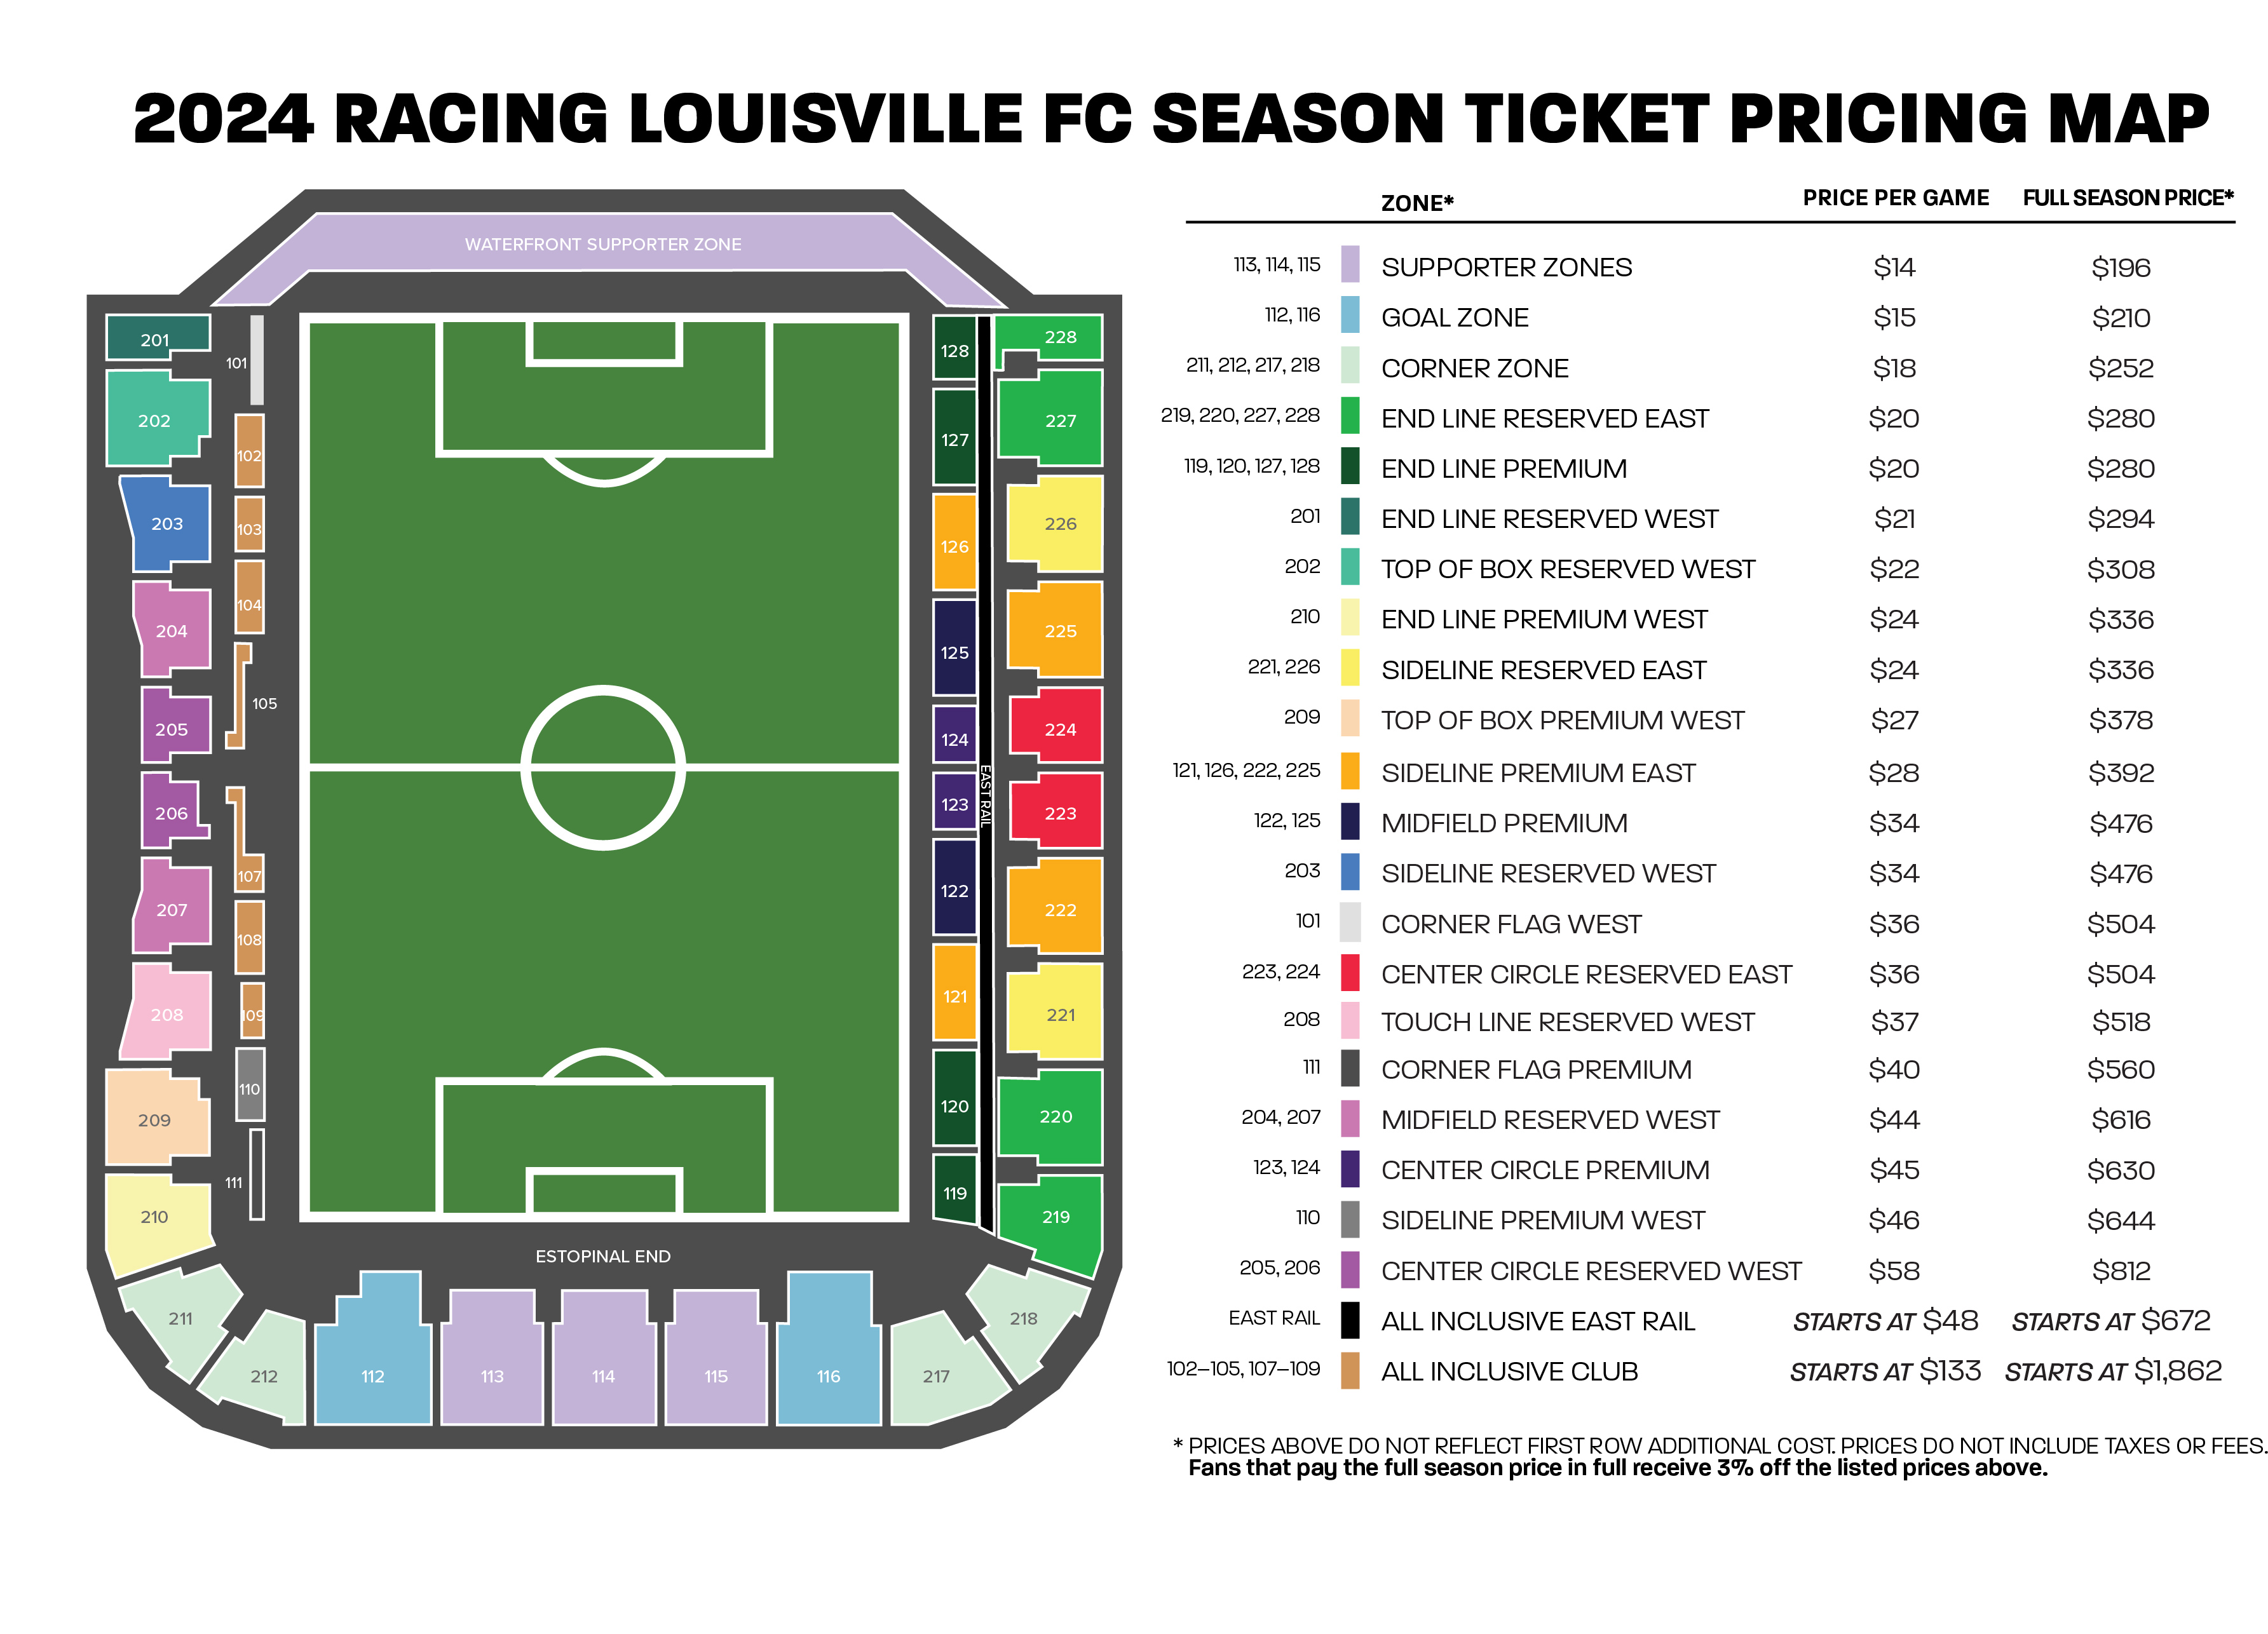 Season Ticket Seating and Pricing